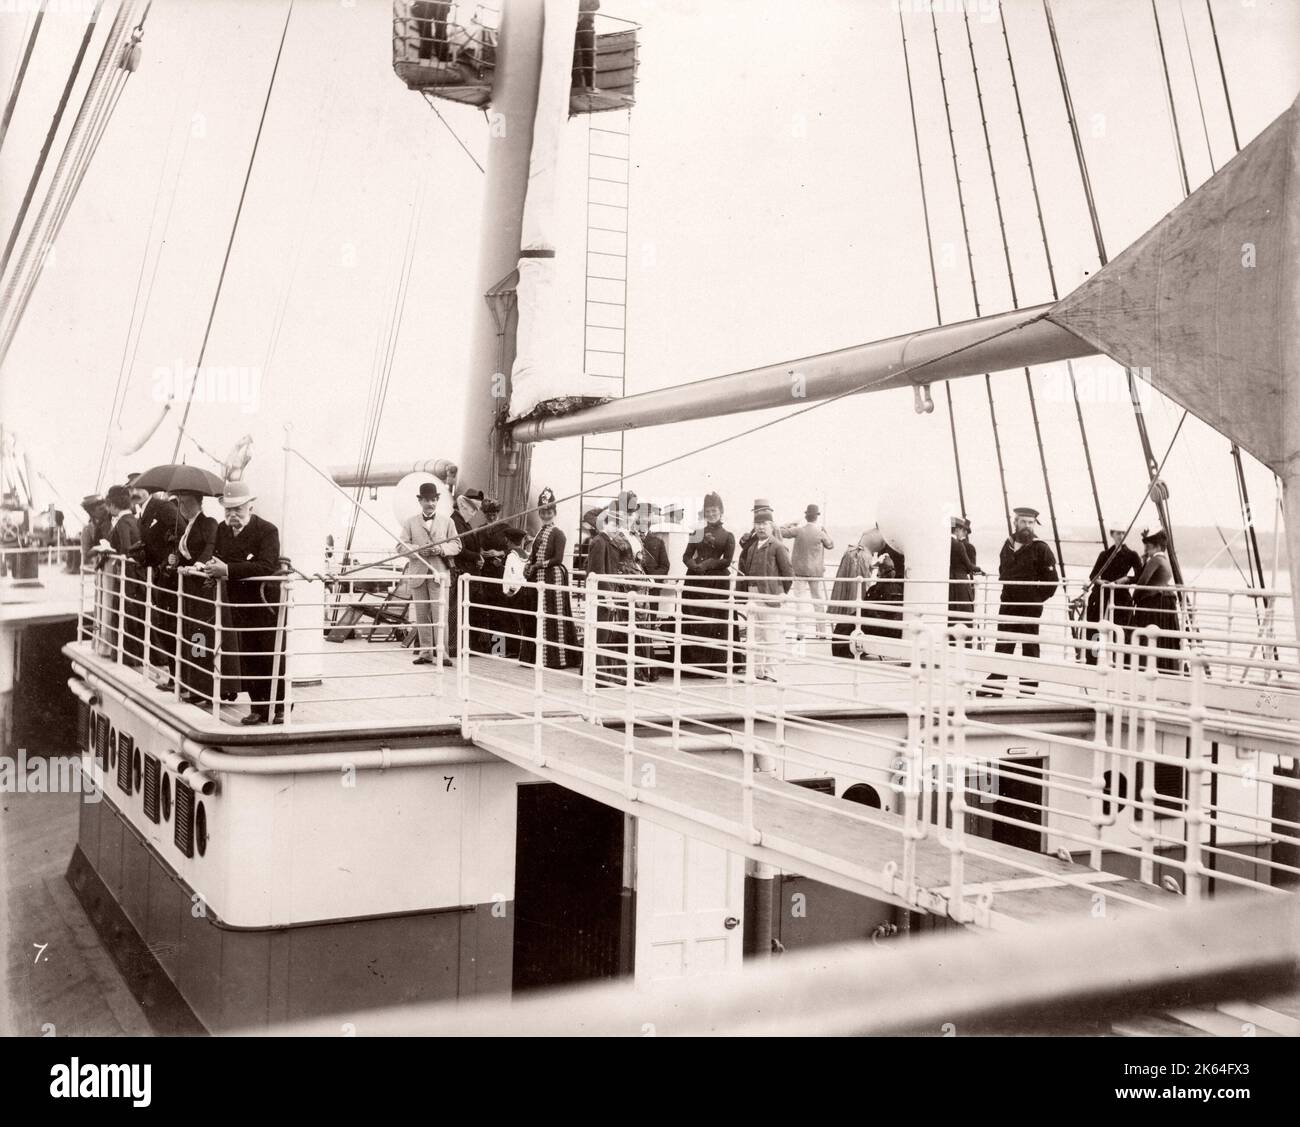 1889 photograph - RMS Teutonic - from an album of images relating to the launch of the vessel, which was built by Harland and Wolff in Belfast, for the White Star Line - later to achieve notoriety as the owner of the Titanic. The album shows interiors of the ship, member of the crew, trial cruises, including a visit onboard by the German Kaiser and Prince of Wales, as well as many images of other visitors. This image - deck of the Teutonic Stock Photo